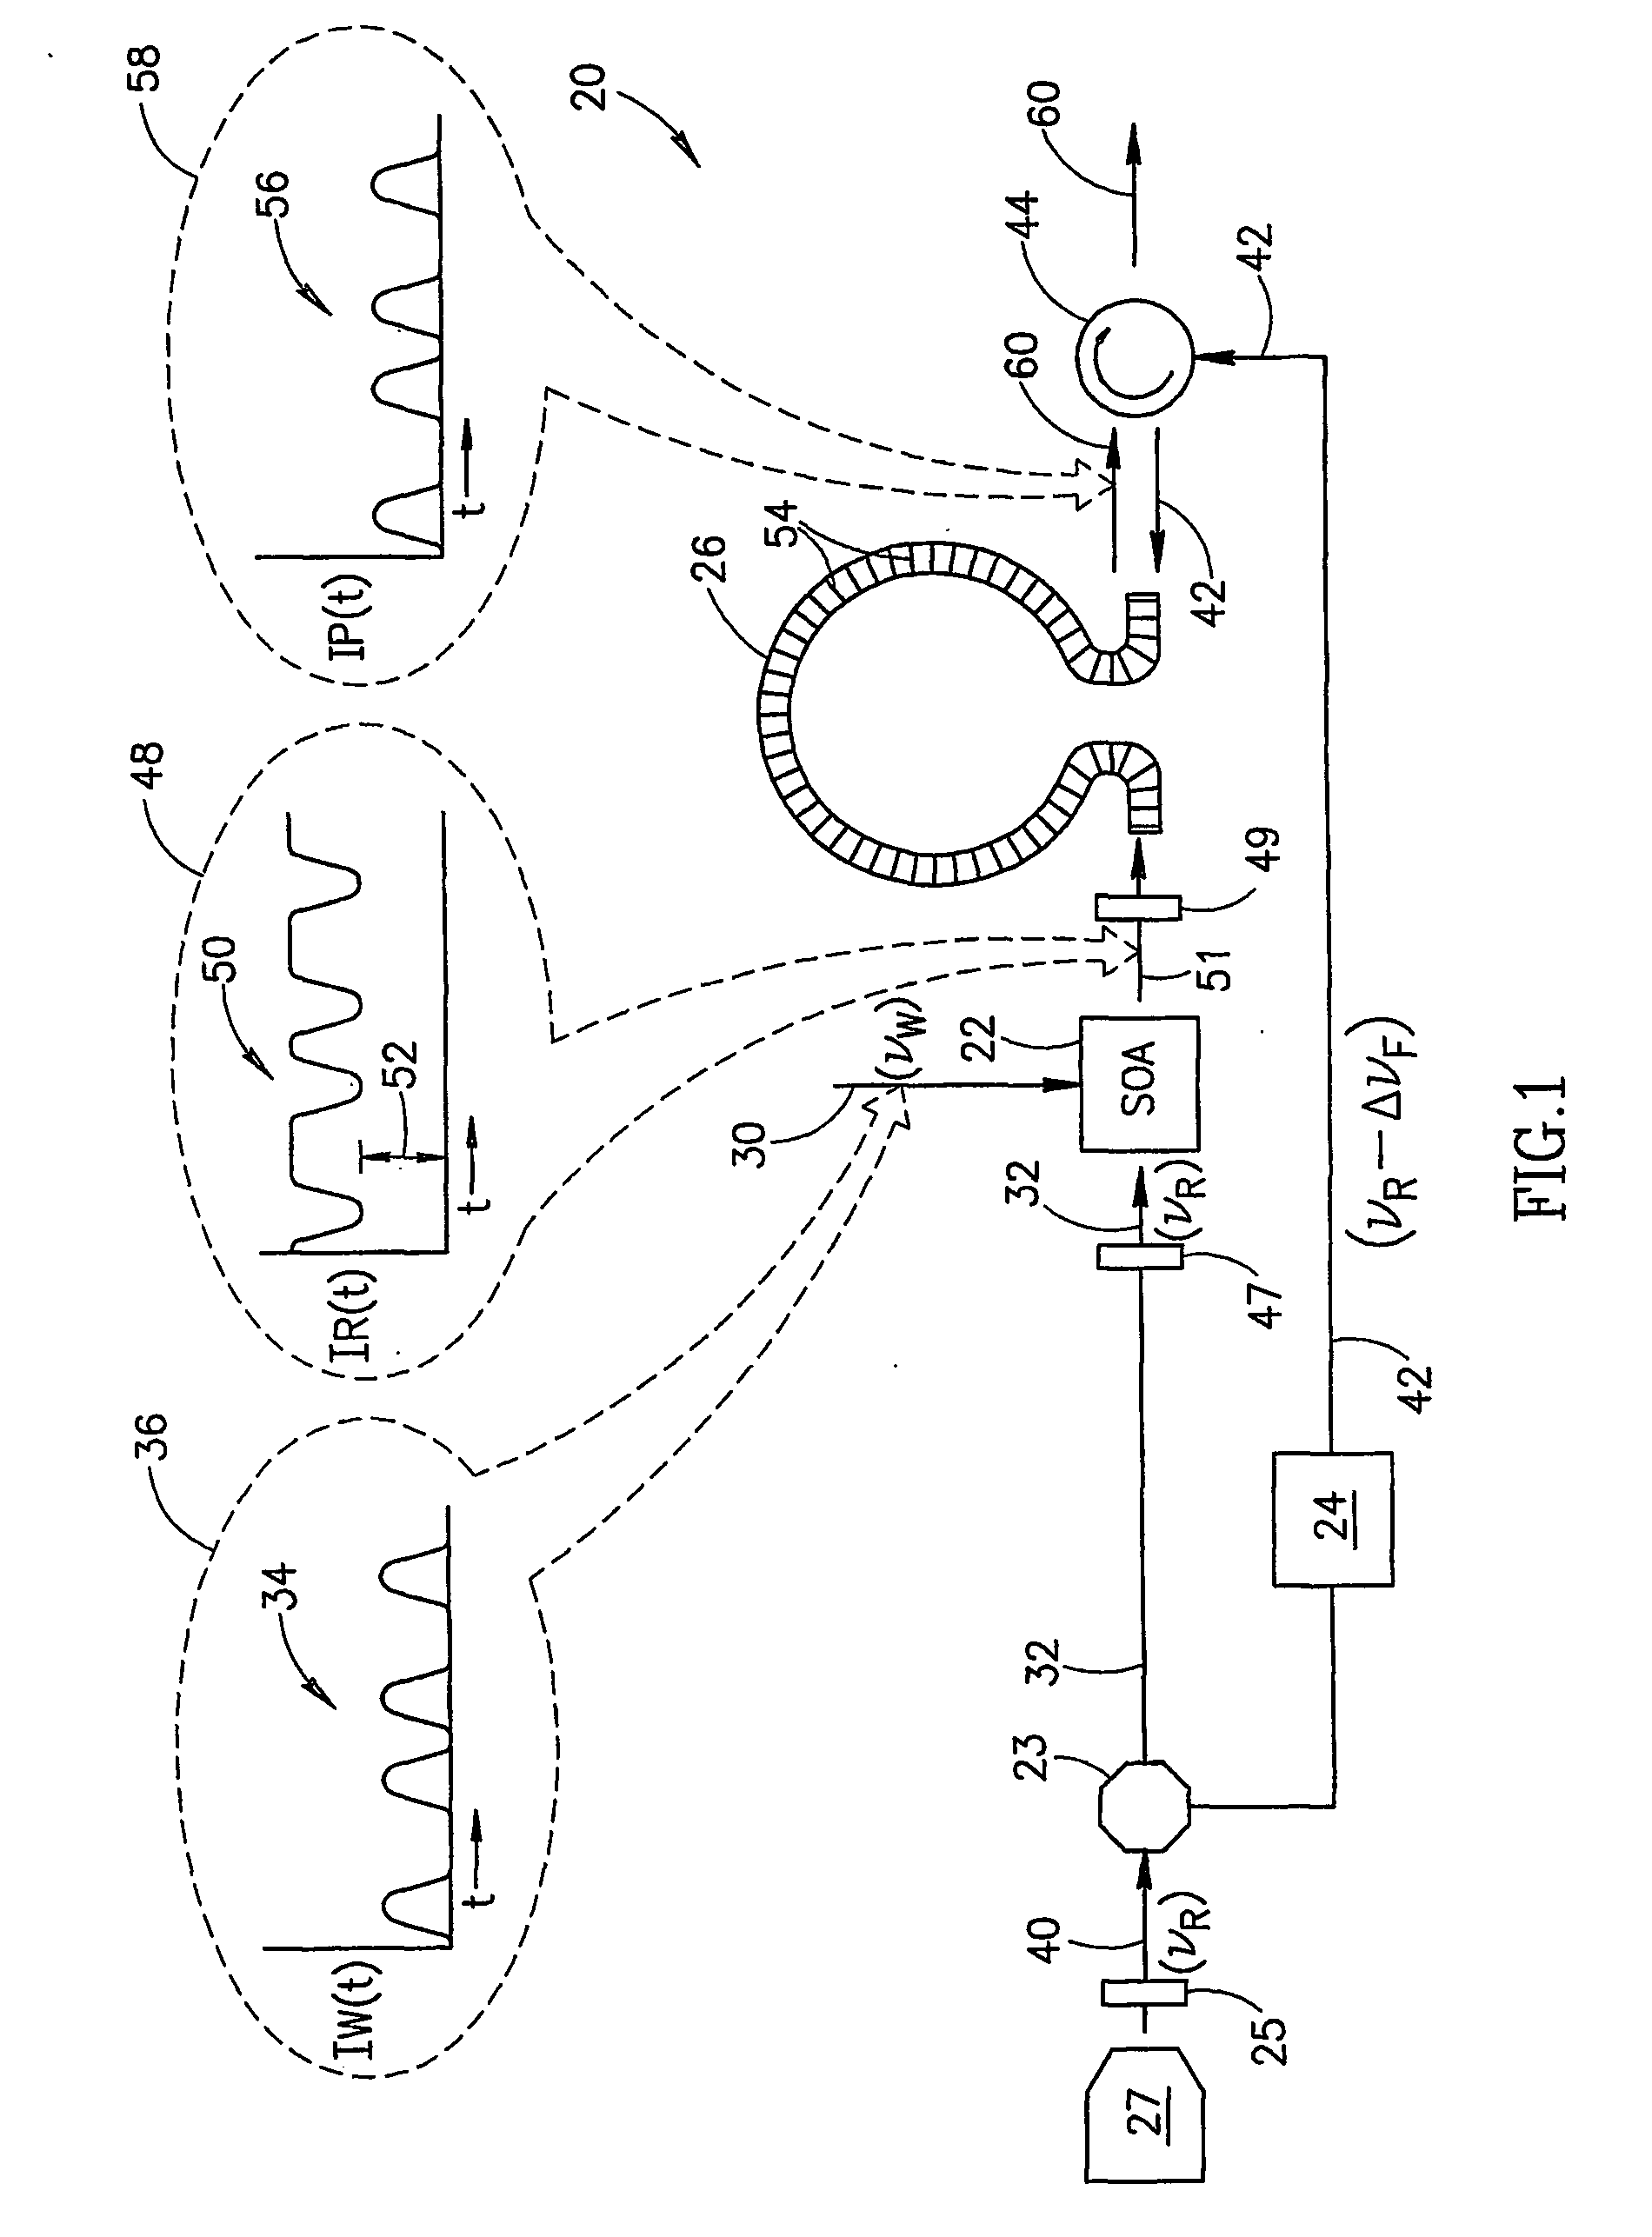 Method and apparatus for generating optical signals